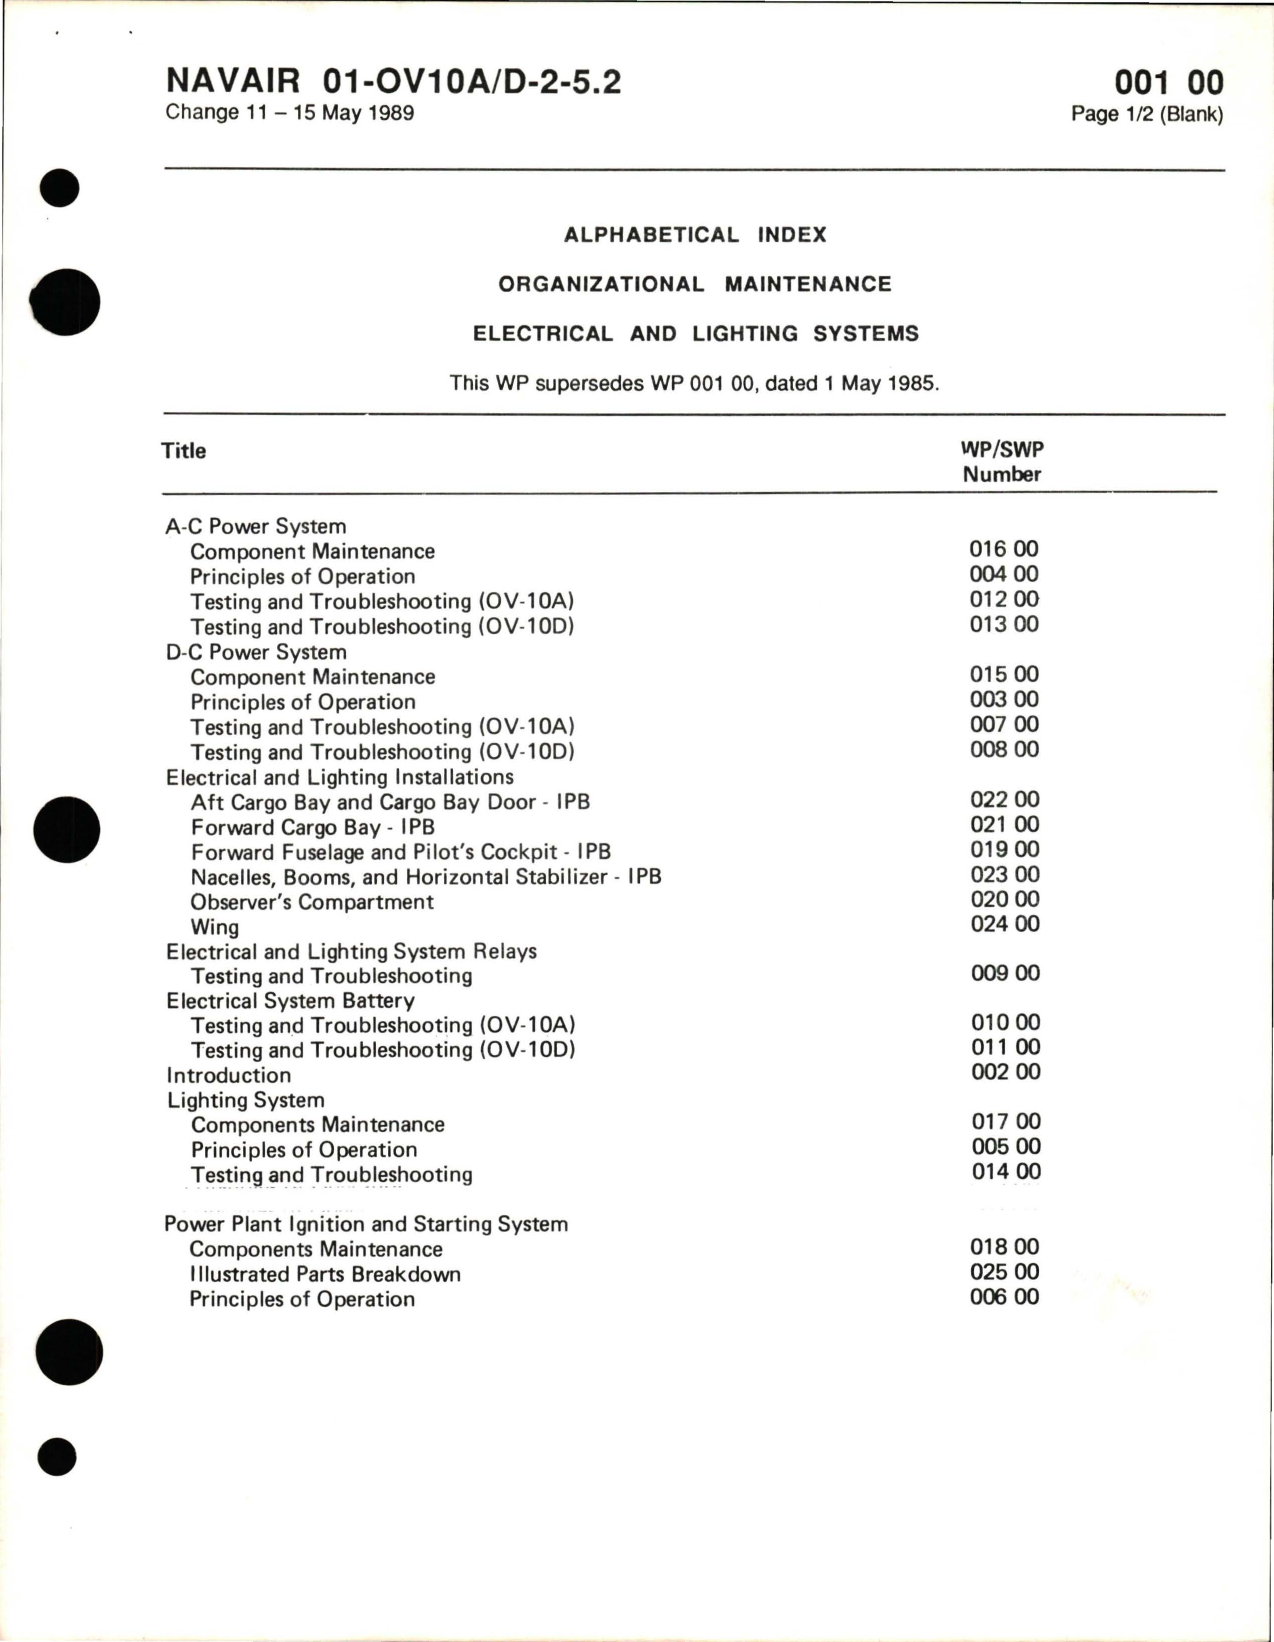 Sample page 7 from AirCorps Library document: Organizational Maintenance with Illustrated Parts Breakdown for Electrical and Lighting Systems for OV-10A/D